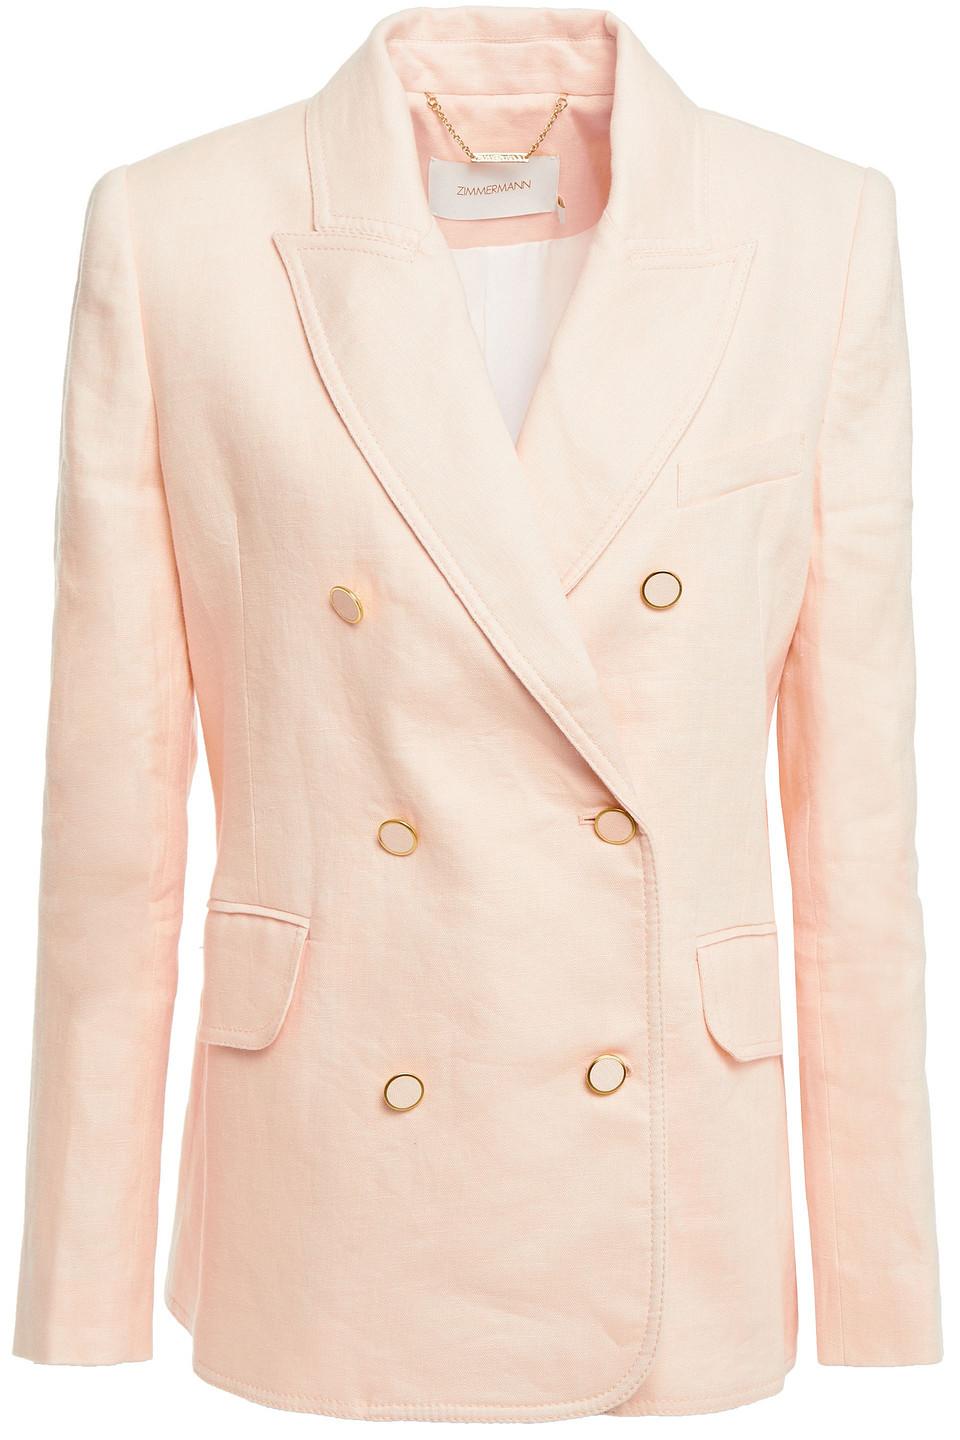 Zimmermann Super Eight Double-breasted Linen Blazer in Natural | Lyst